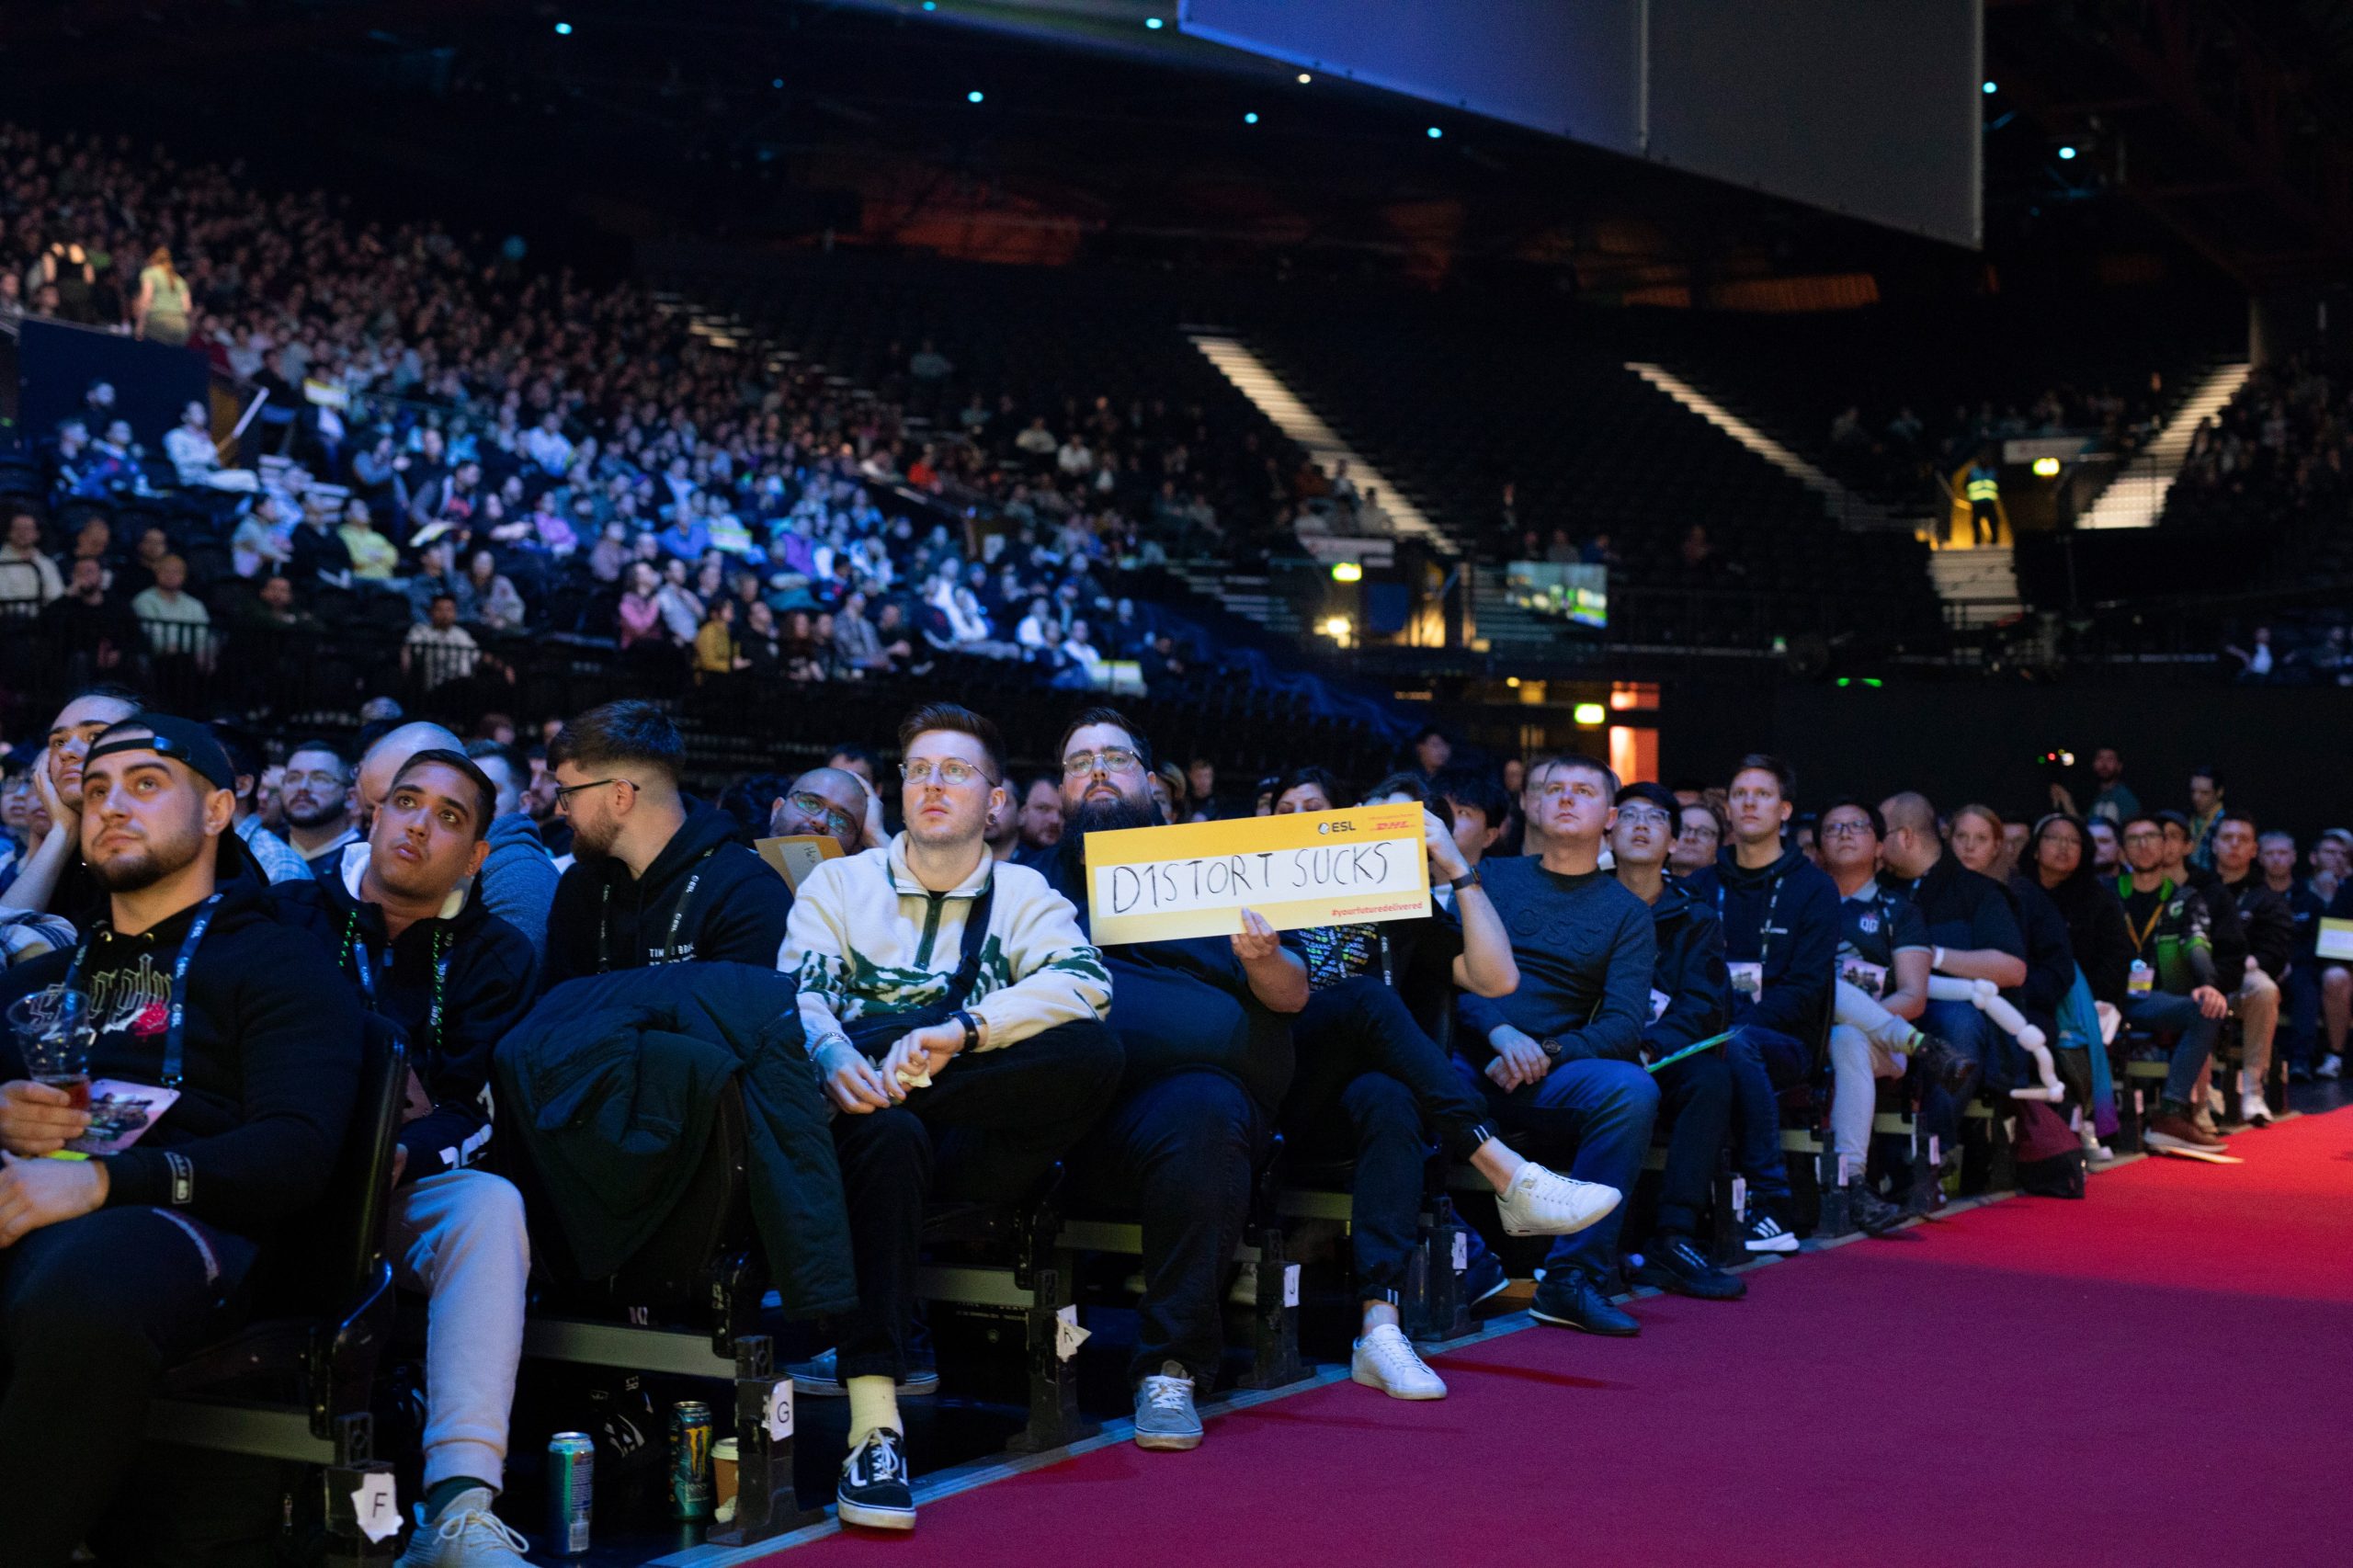 Major events such as ESL One Birmingham attract crowds thousands strong